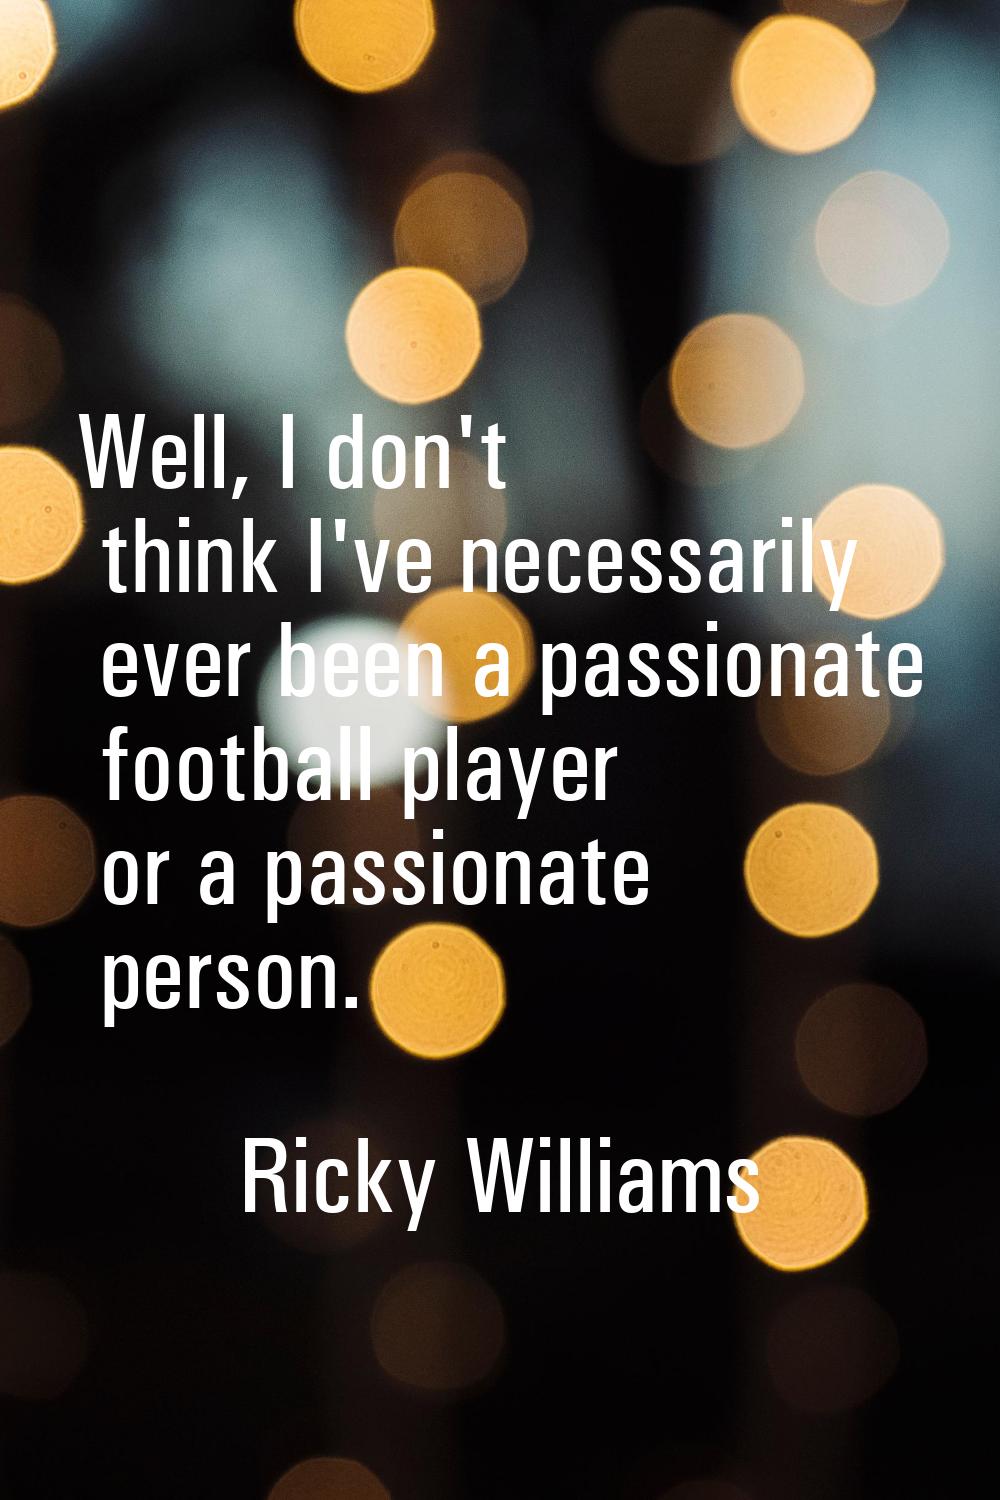 Well, I don't think I've necessarily ever been a passionate football player or a passionate person.